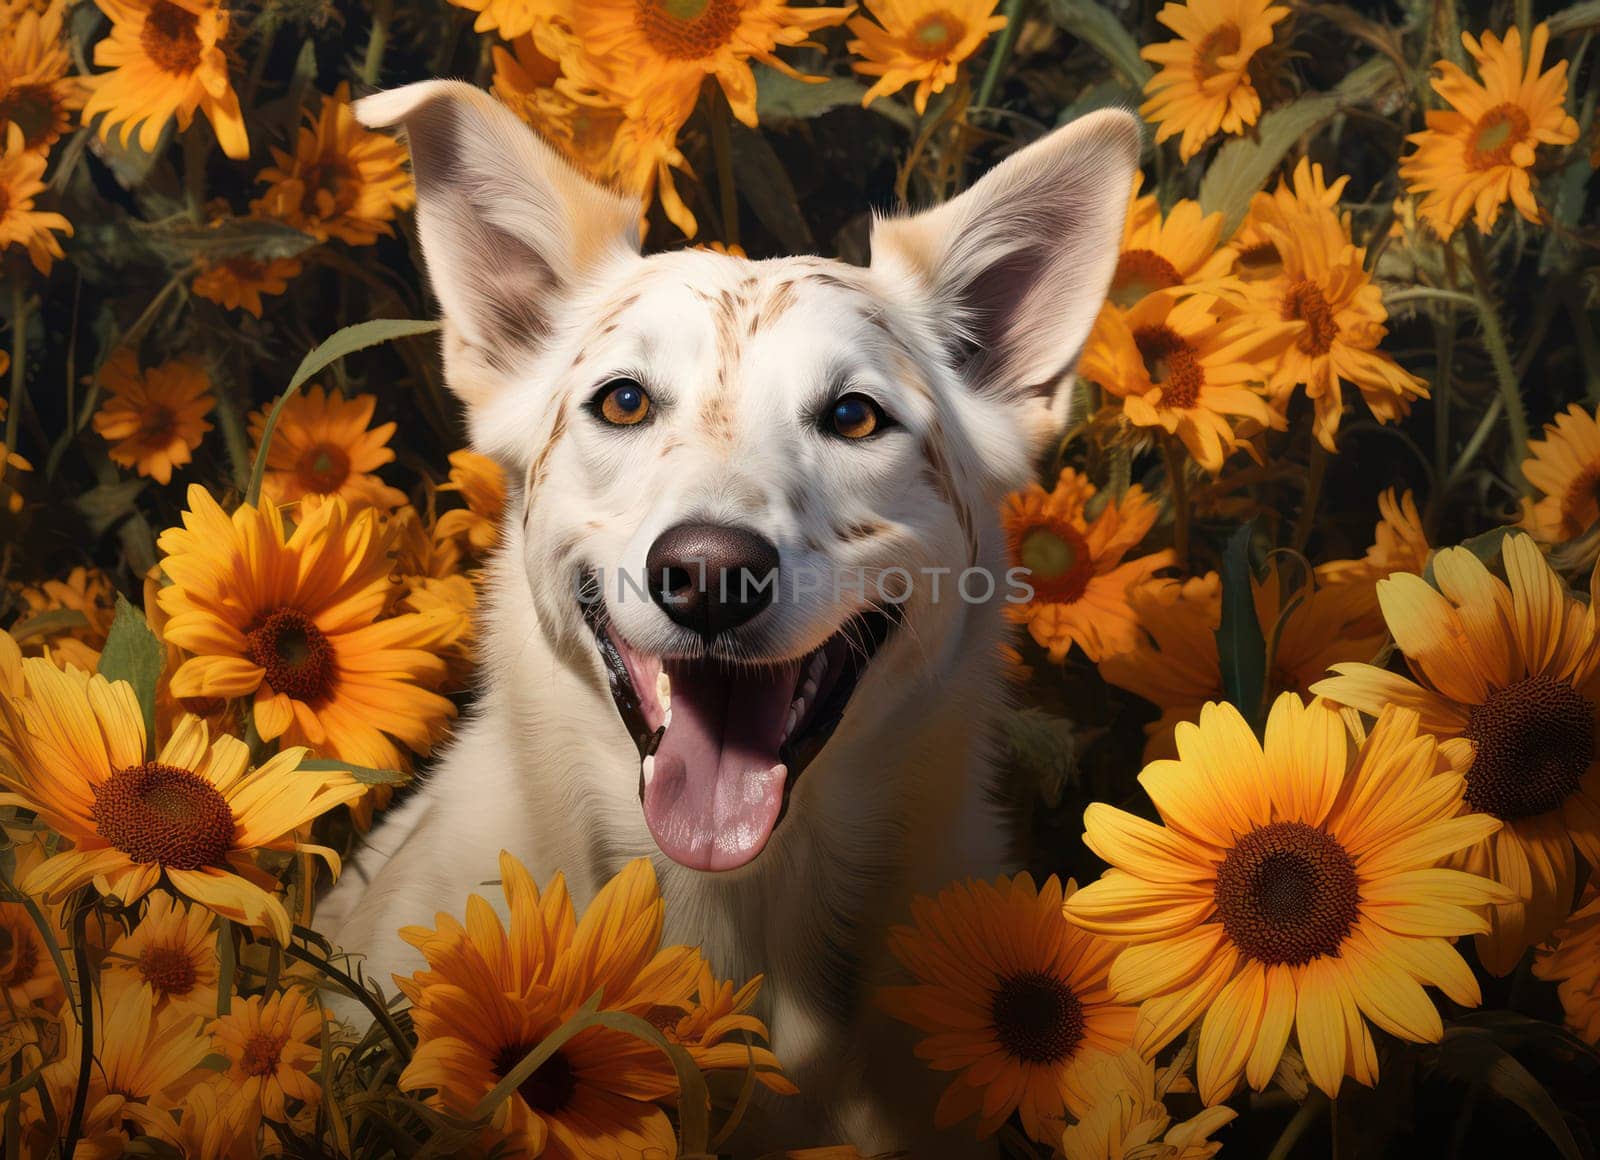 Happy Dog in Nature: A Portrait of a Cute, White Purebred Shepherd with a Smile, Sitting in a Green Meadow with Yellow Flowers by Vichizh